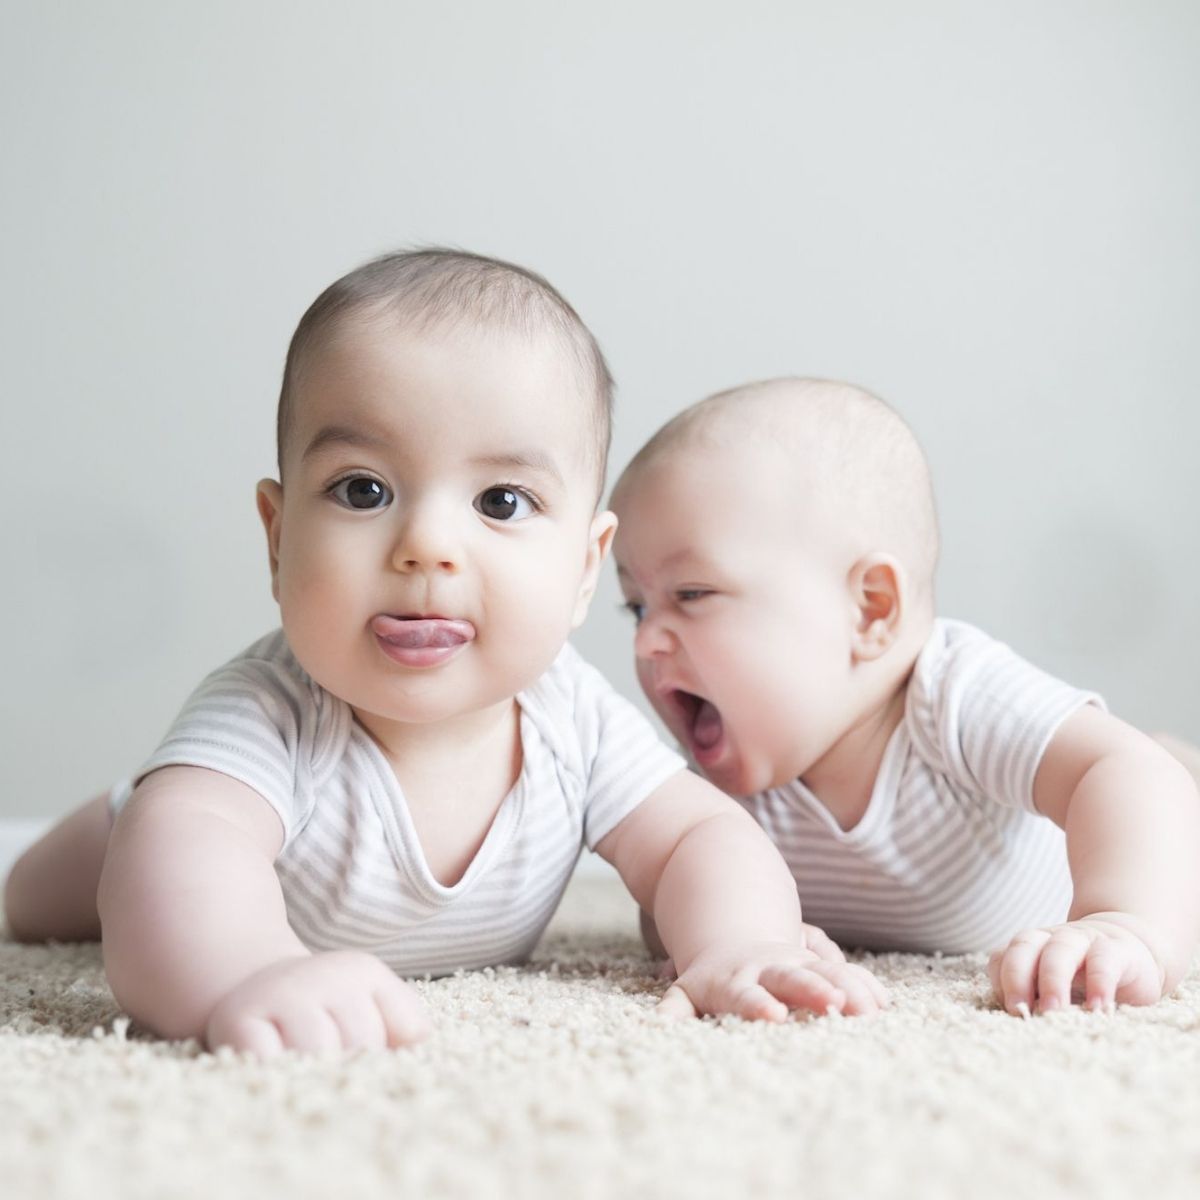 How Do I Take Care of My Twin Babies?